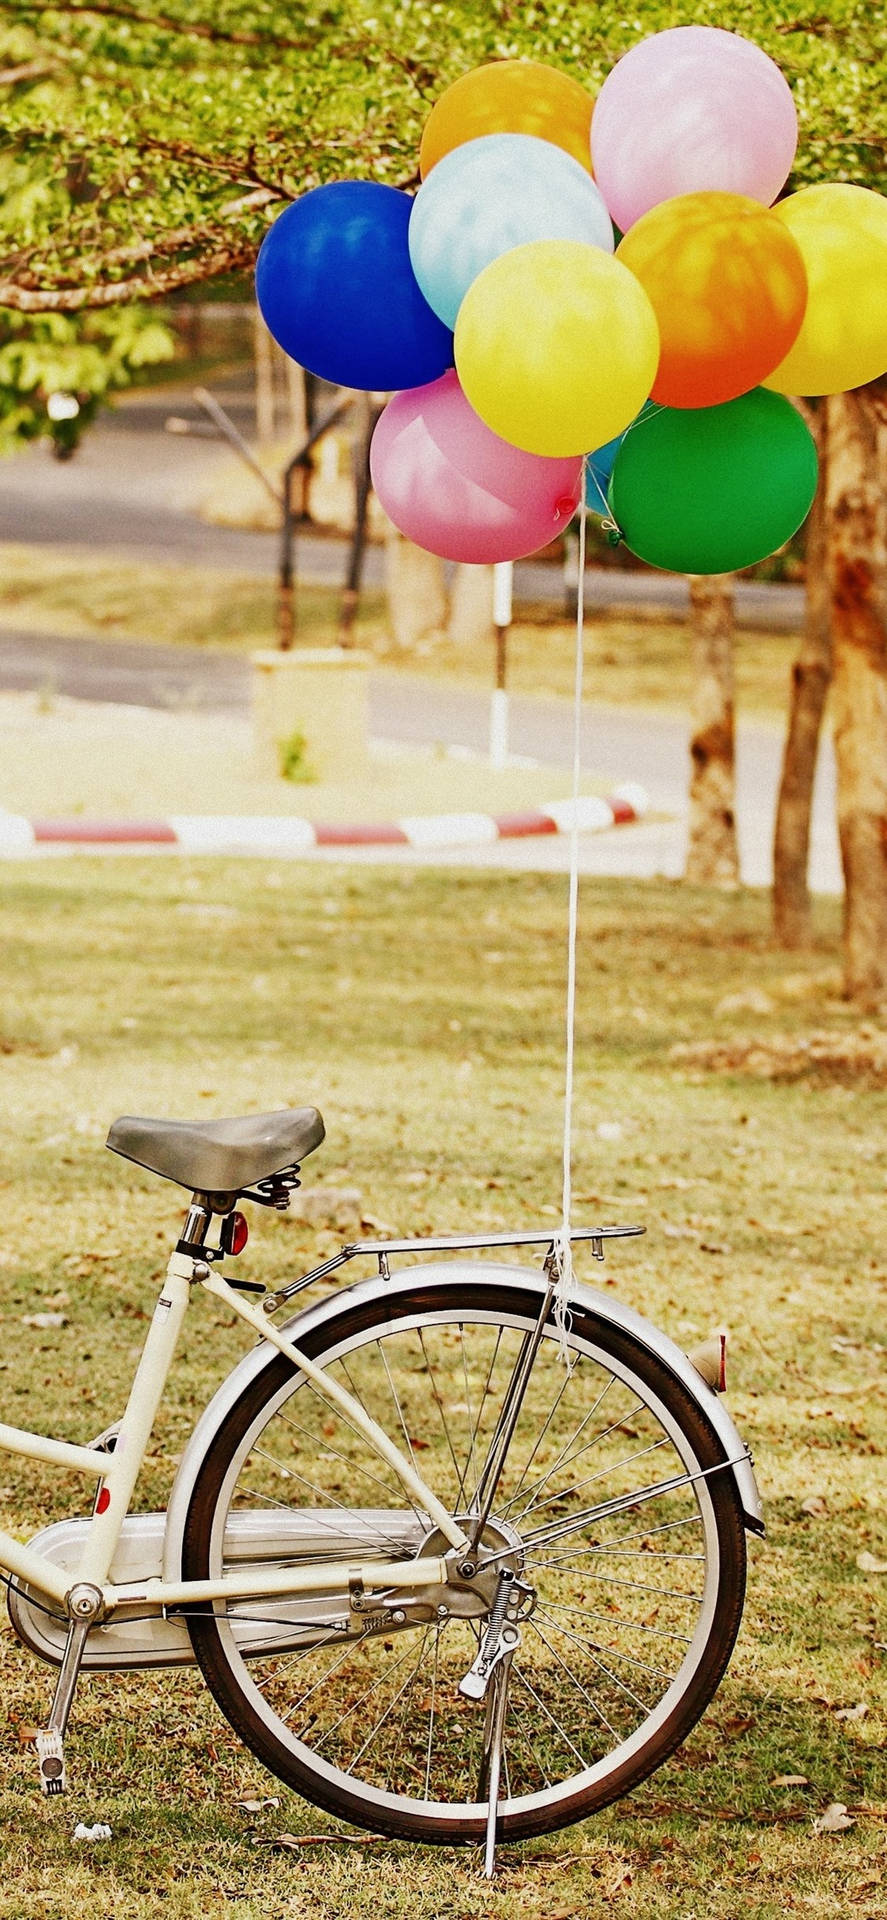 Vintage Iphone Aesthetic Balloons And Bicycle Background